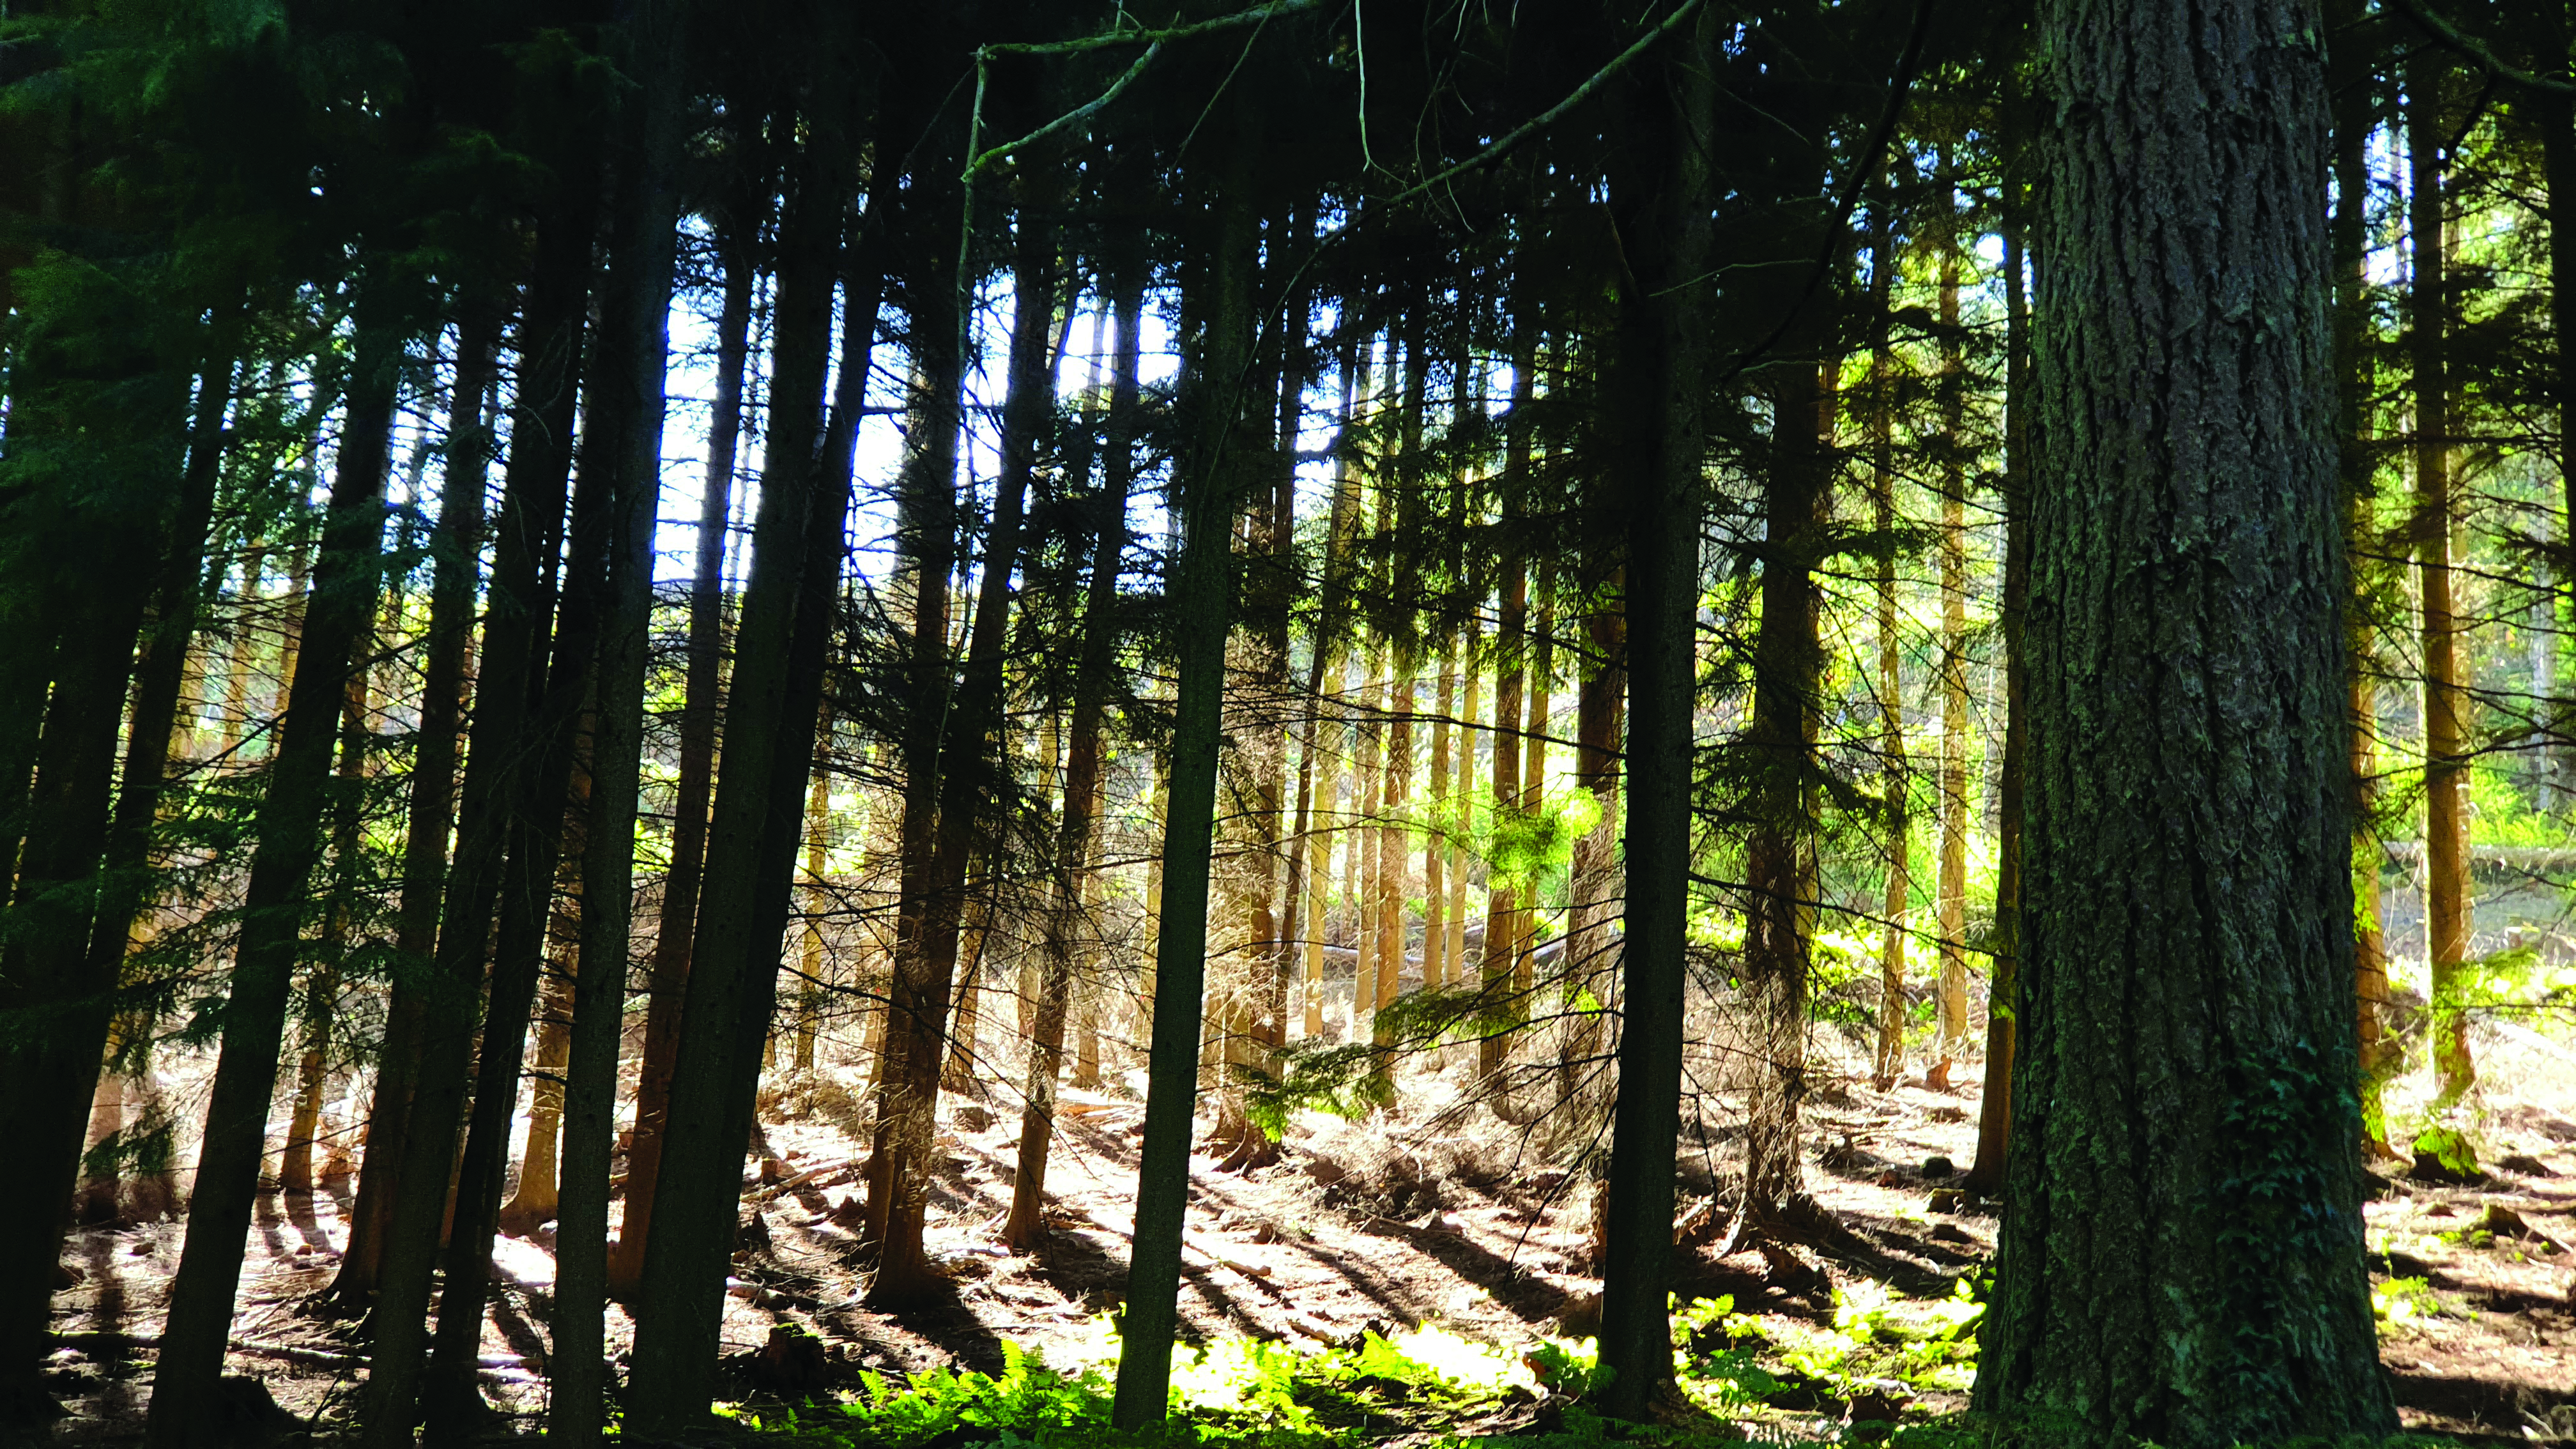 Conifer woods at Nutcombe Bottom